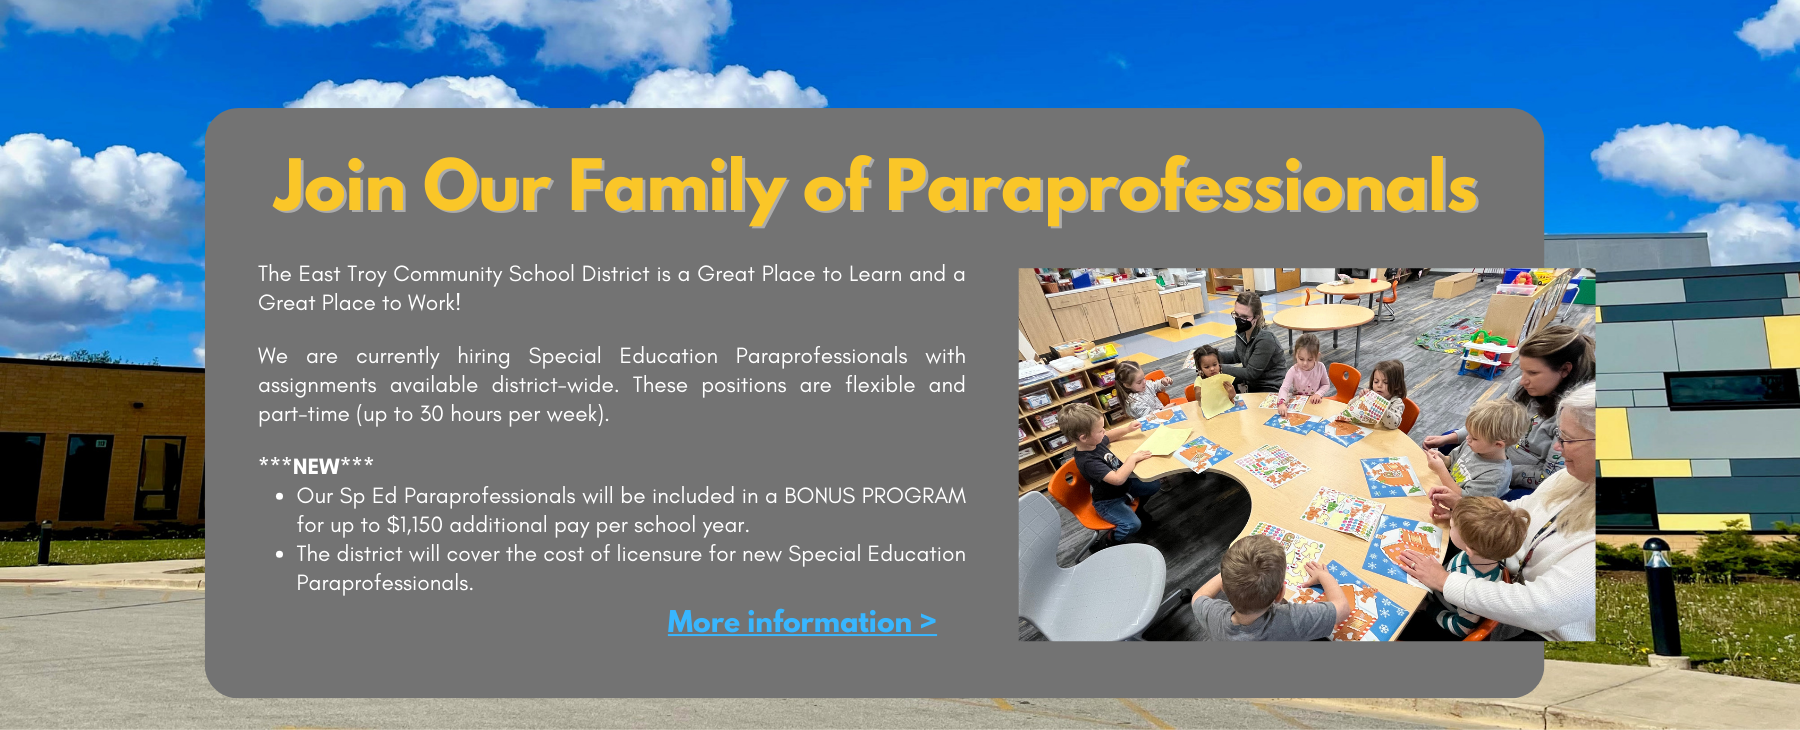 Join Our Sp Ed Paraprofessionals